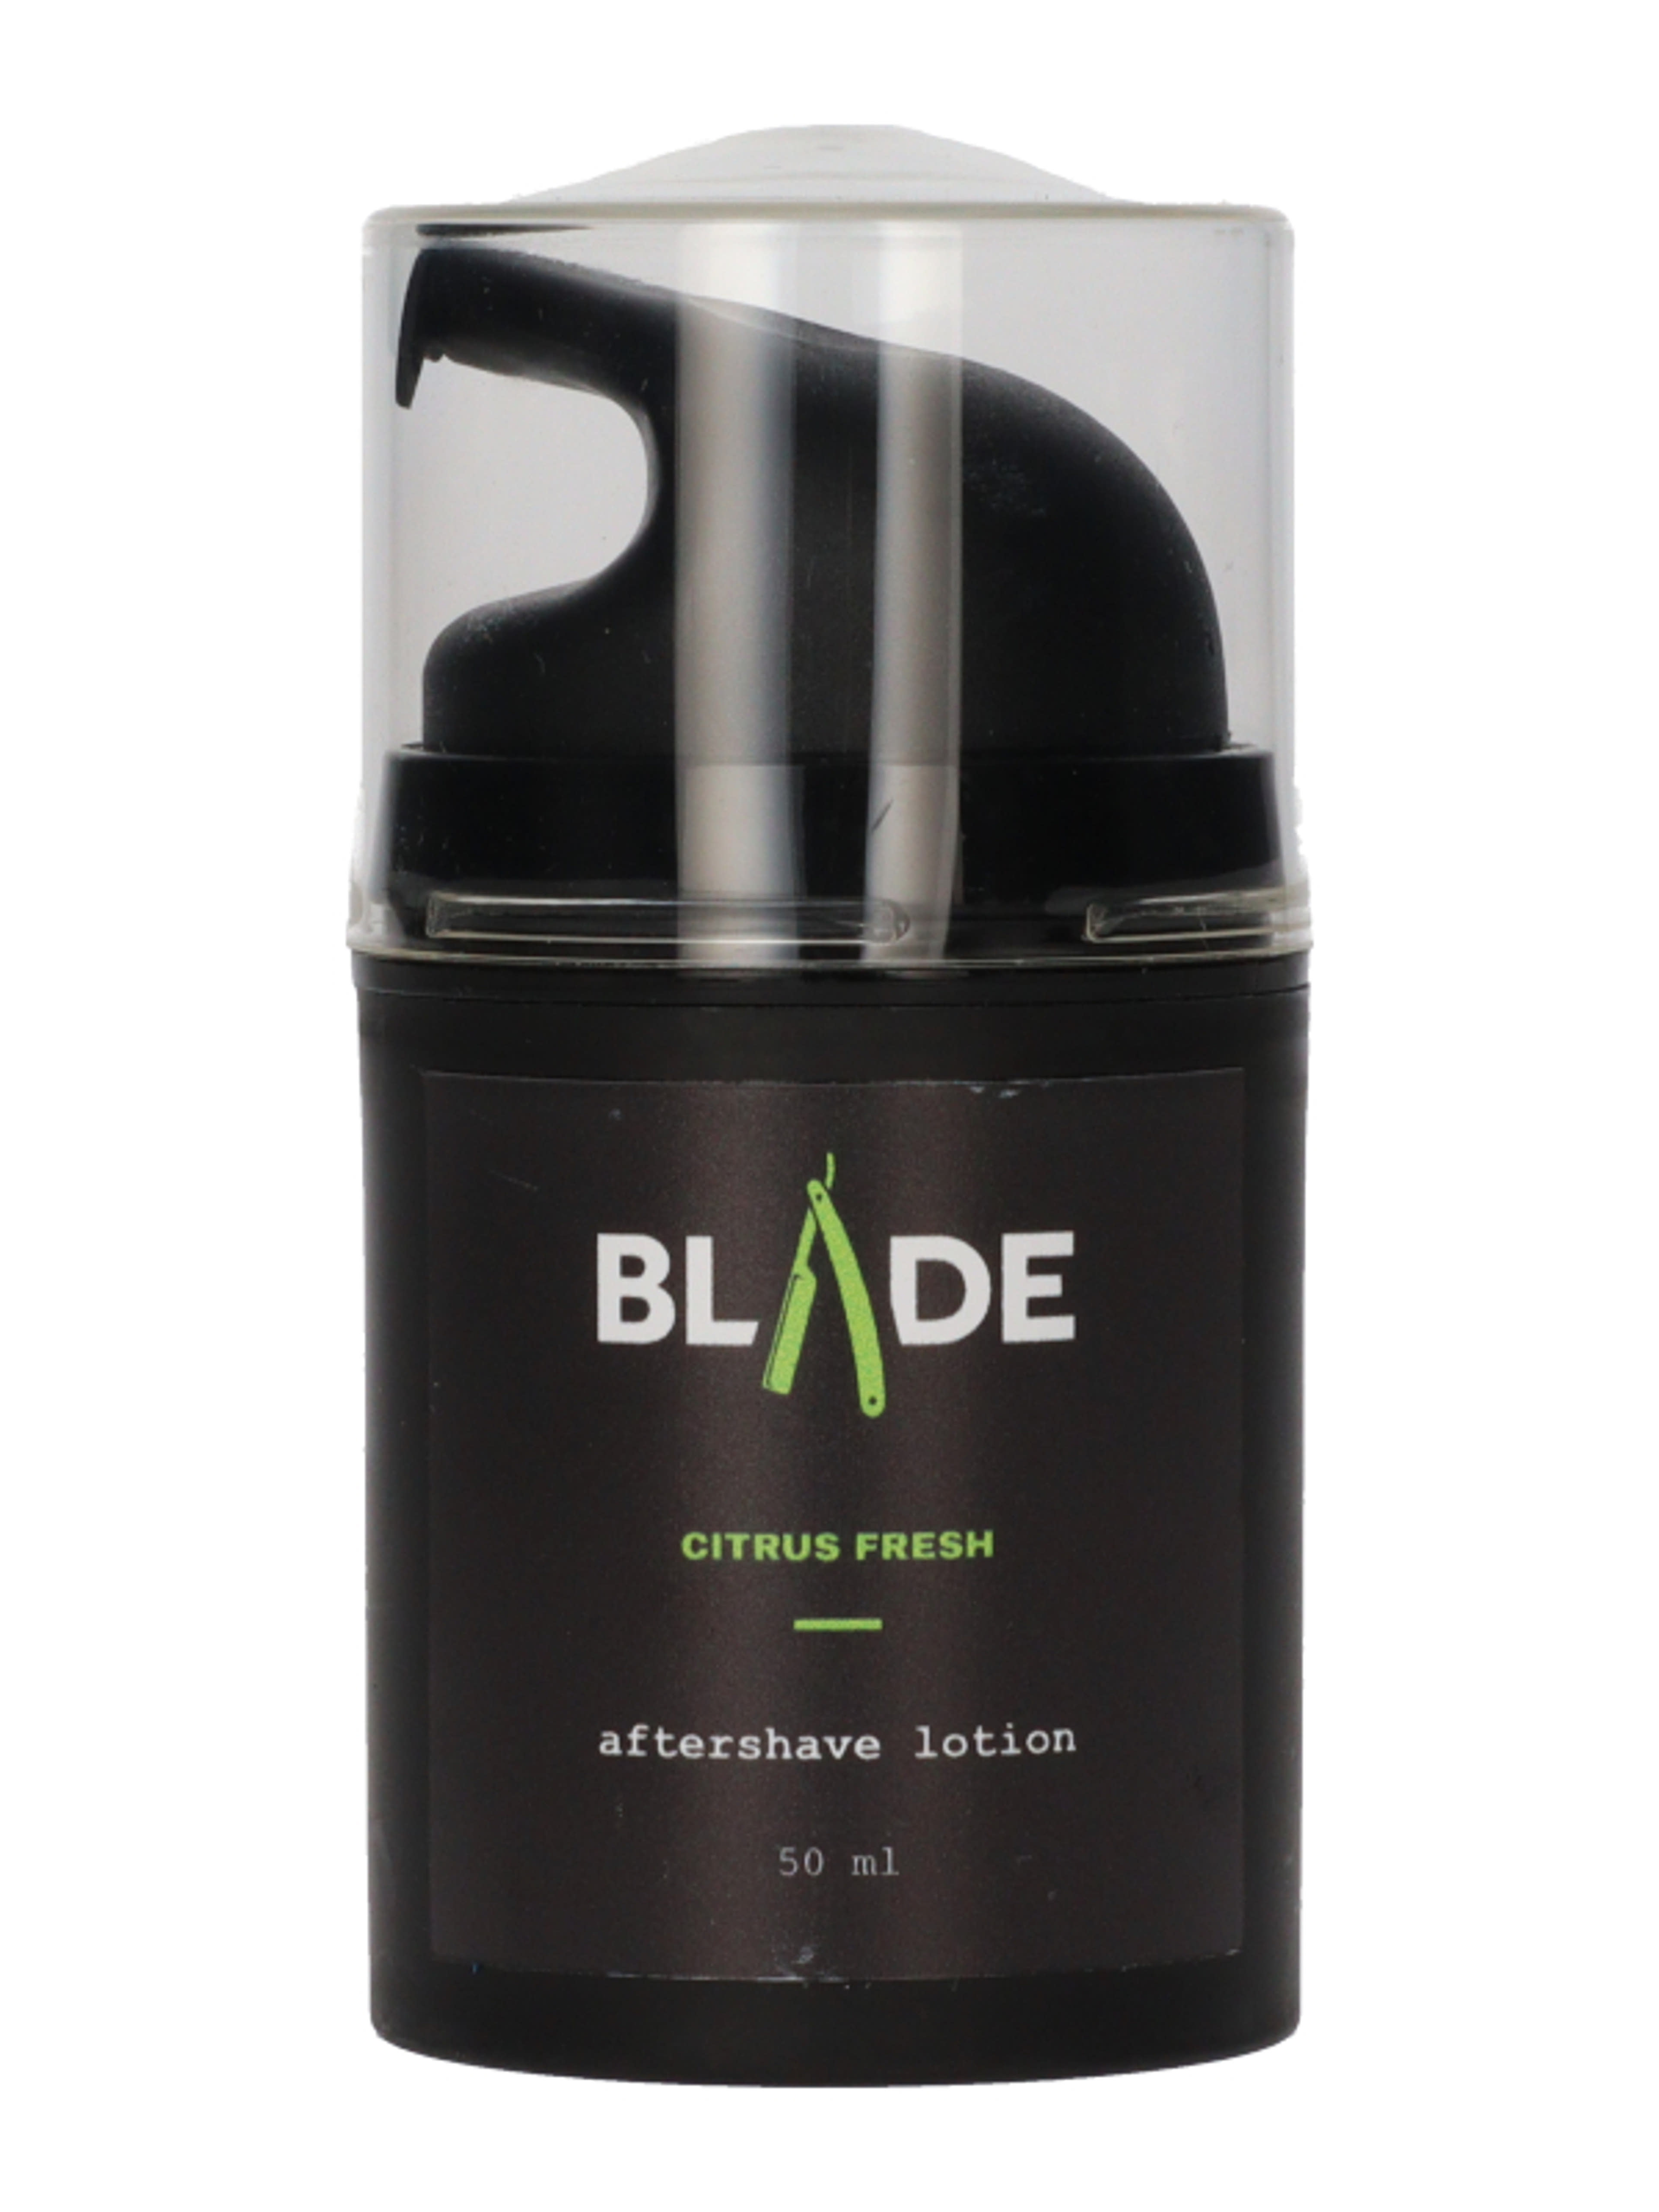 Blade after shave lotion - 50 ml